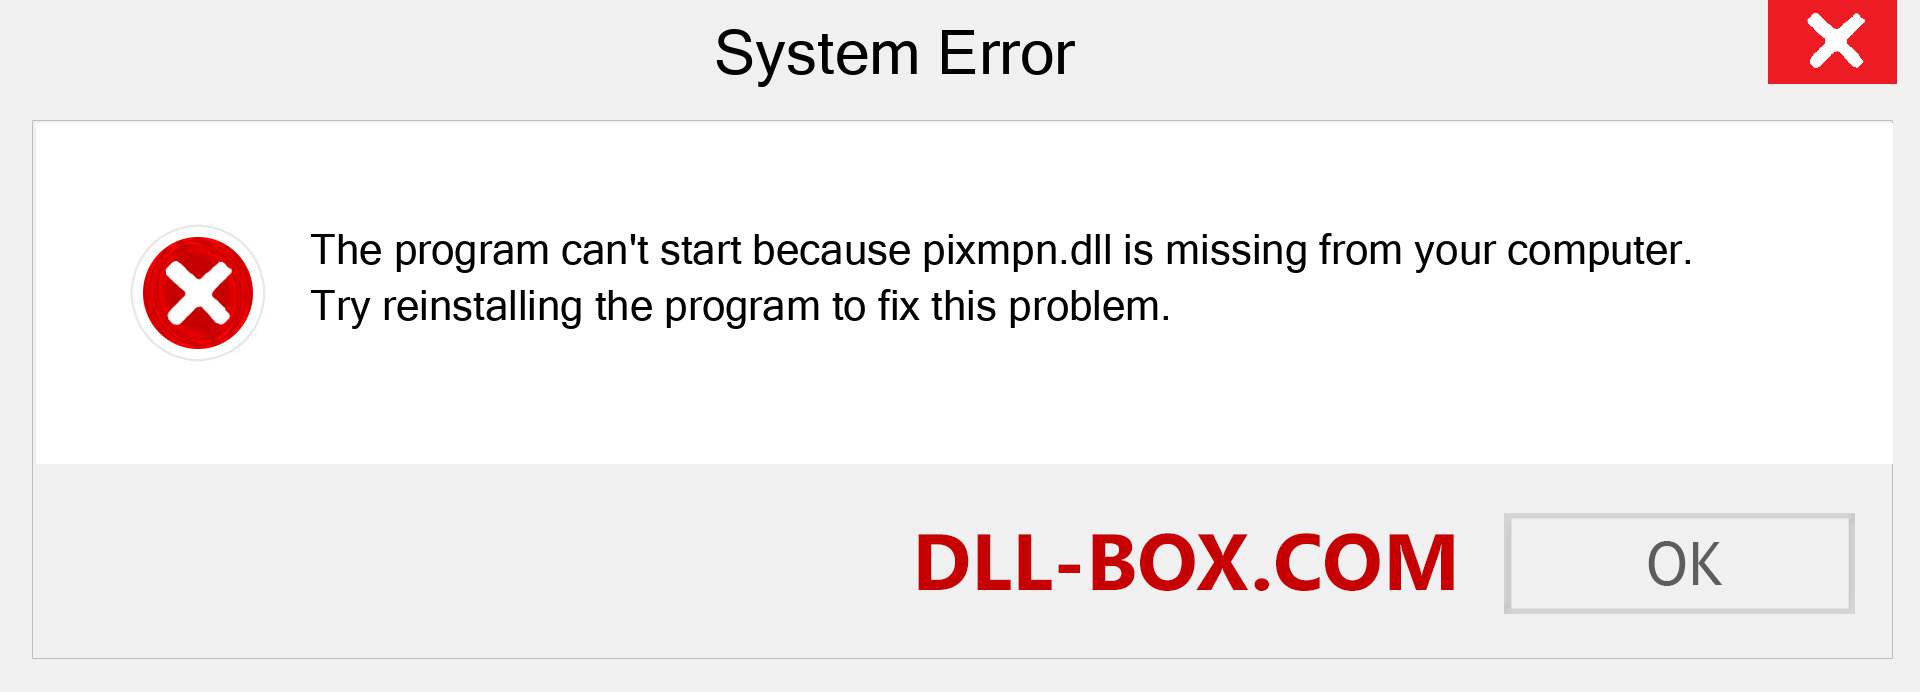  pixmpn.dll file is missing?. Download for Windows 7, 8, 10 - Fix  pixmpn dll Missing Error on Windows, photos, images